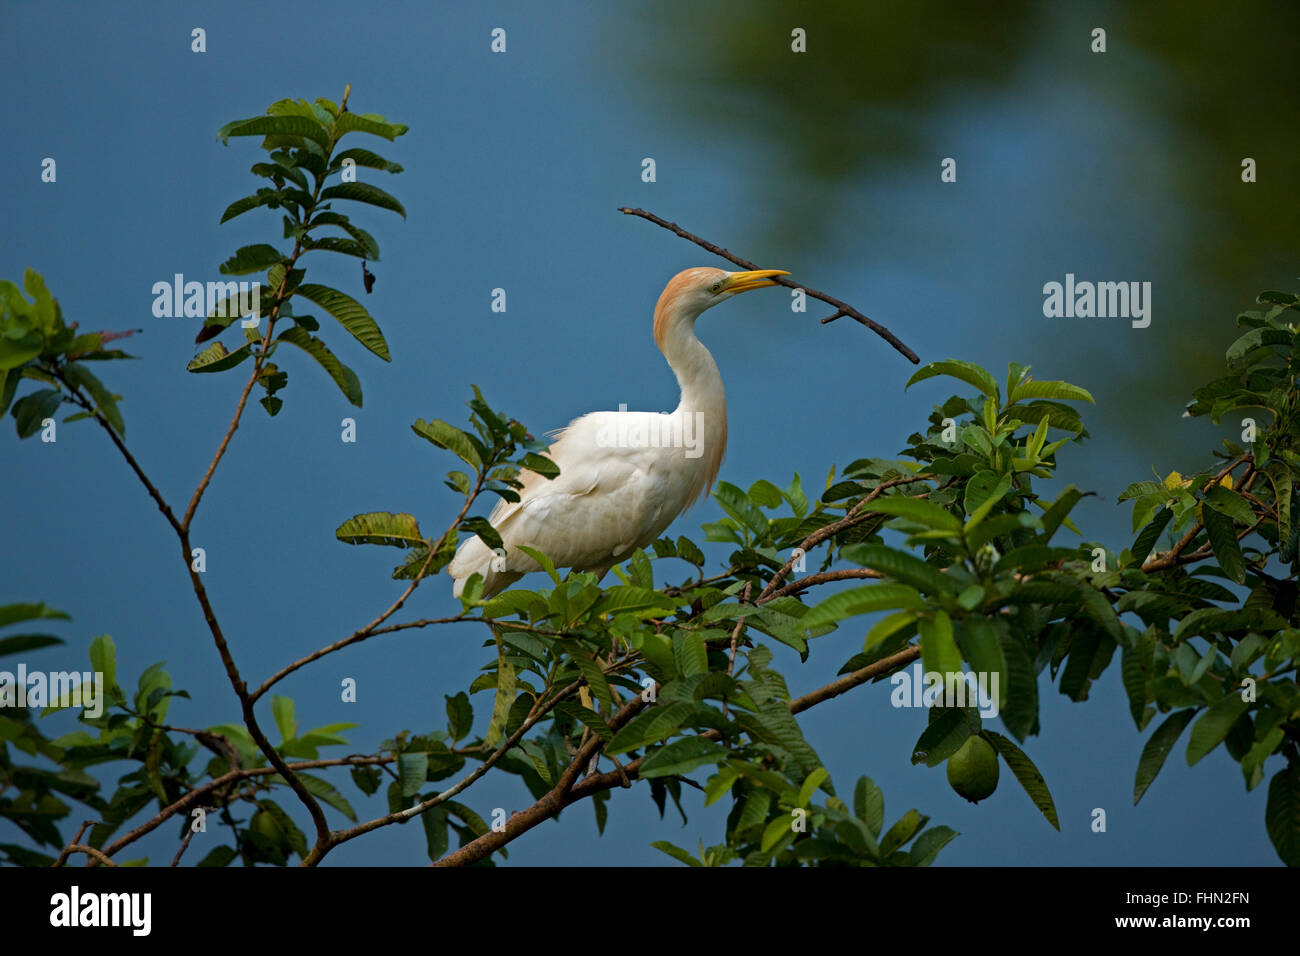 cattle egret (Bubulcus ibis), with nesting material, Costa Rica Stock Photo